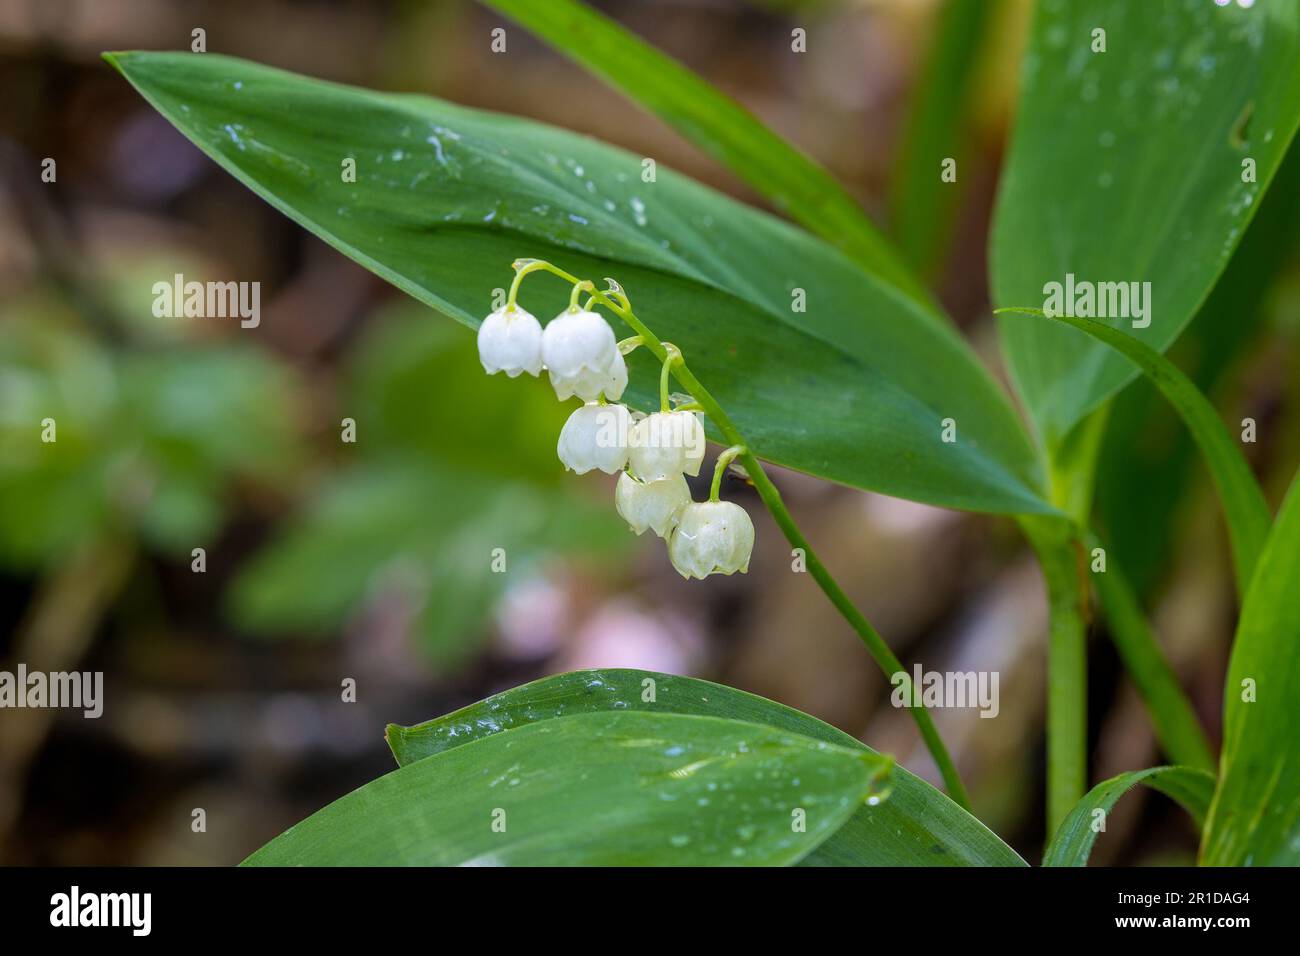 Flowers of lily of the valley, Convallaria majalis Stock Photo - Alamy